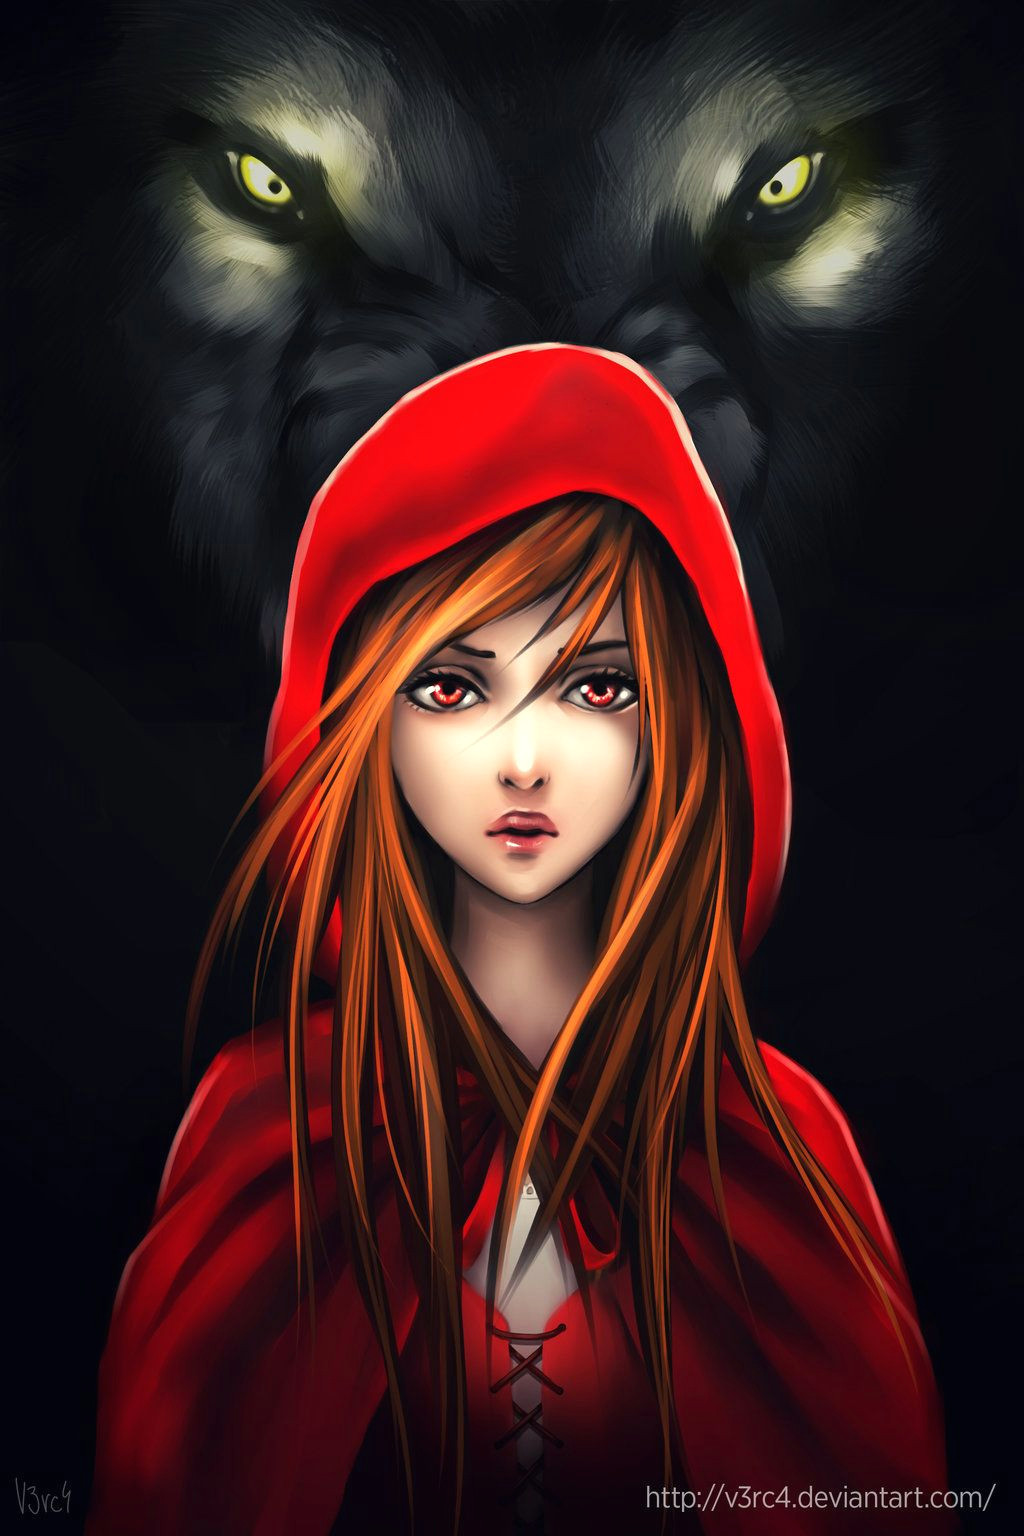 she was once red riding hood but really inside she was the wolf all along sounds like ouat tbh